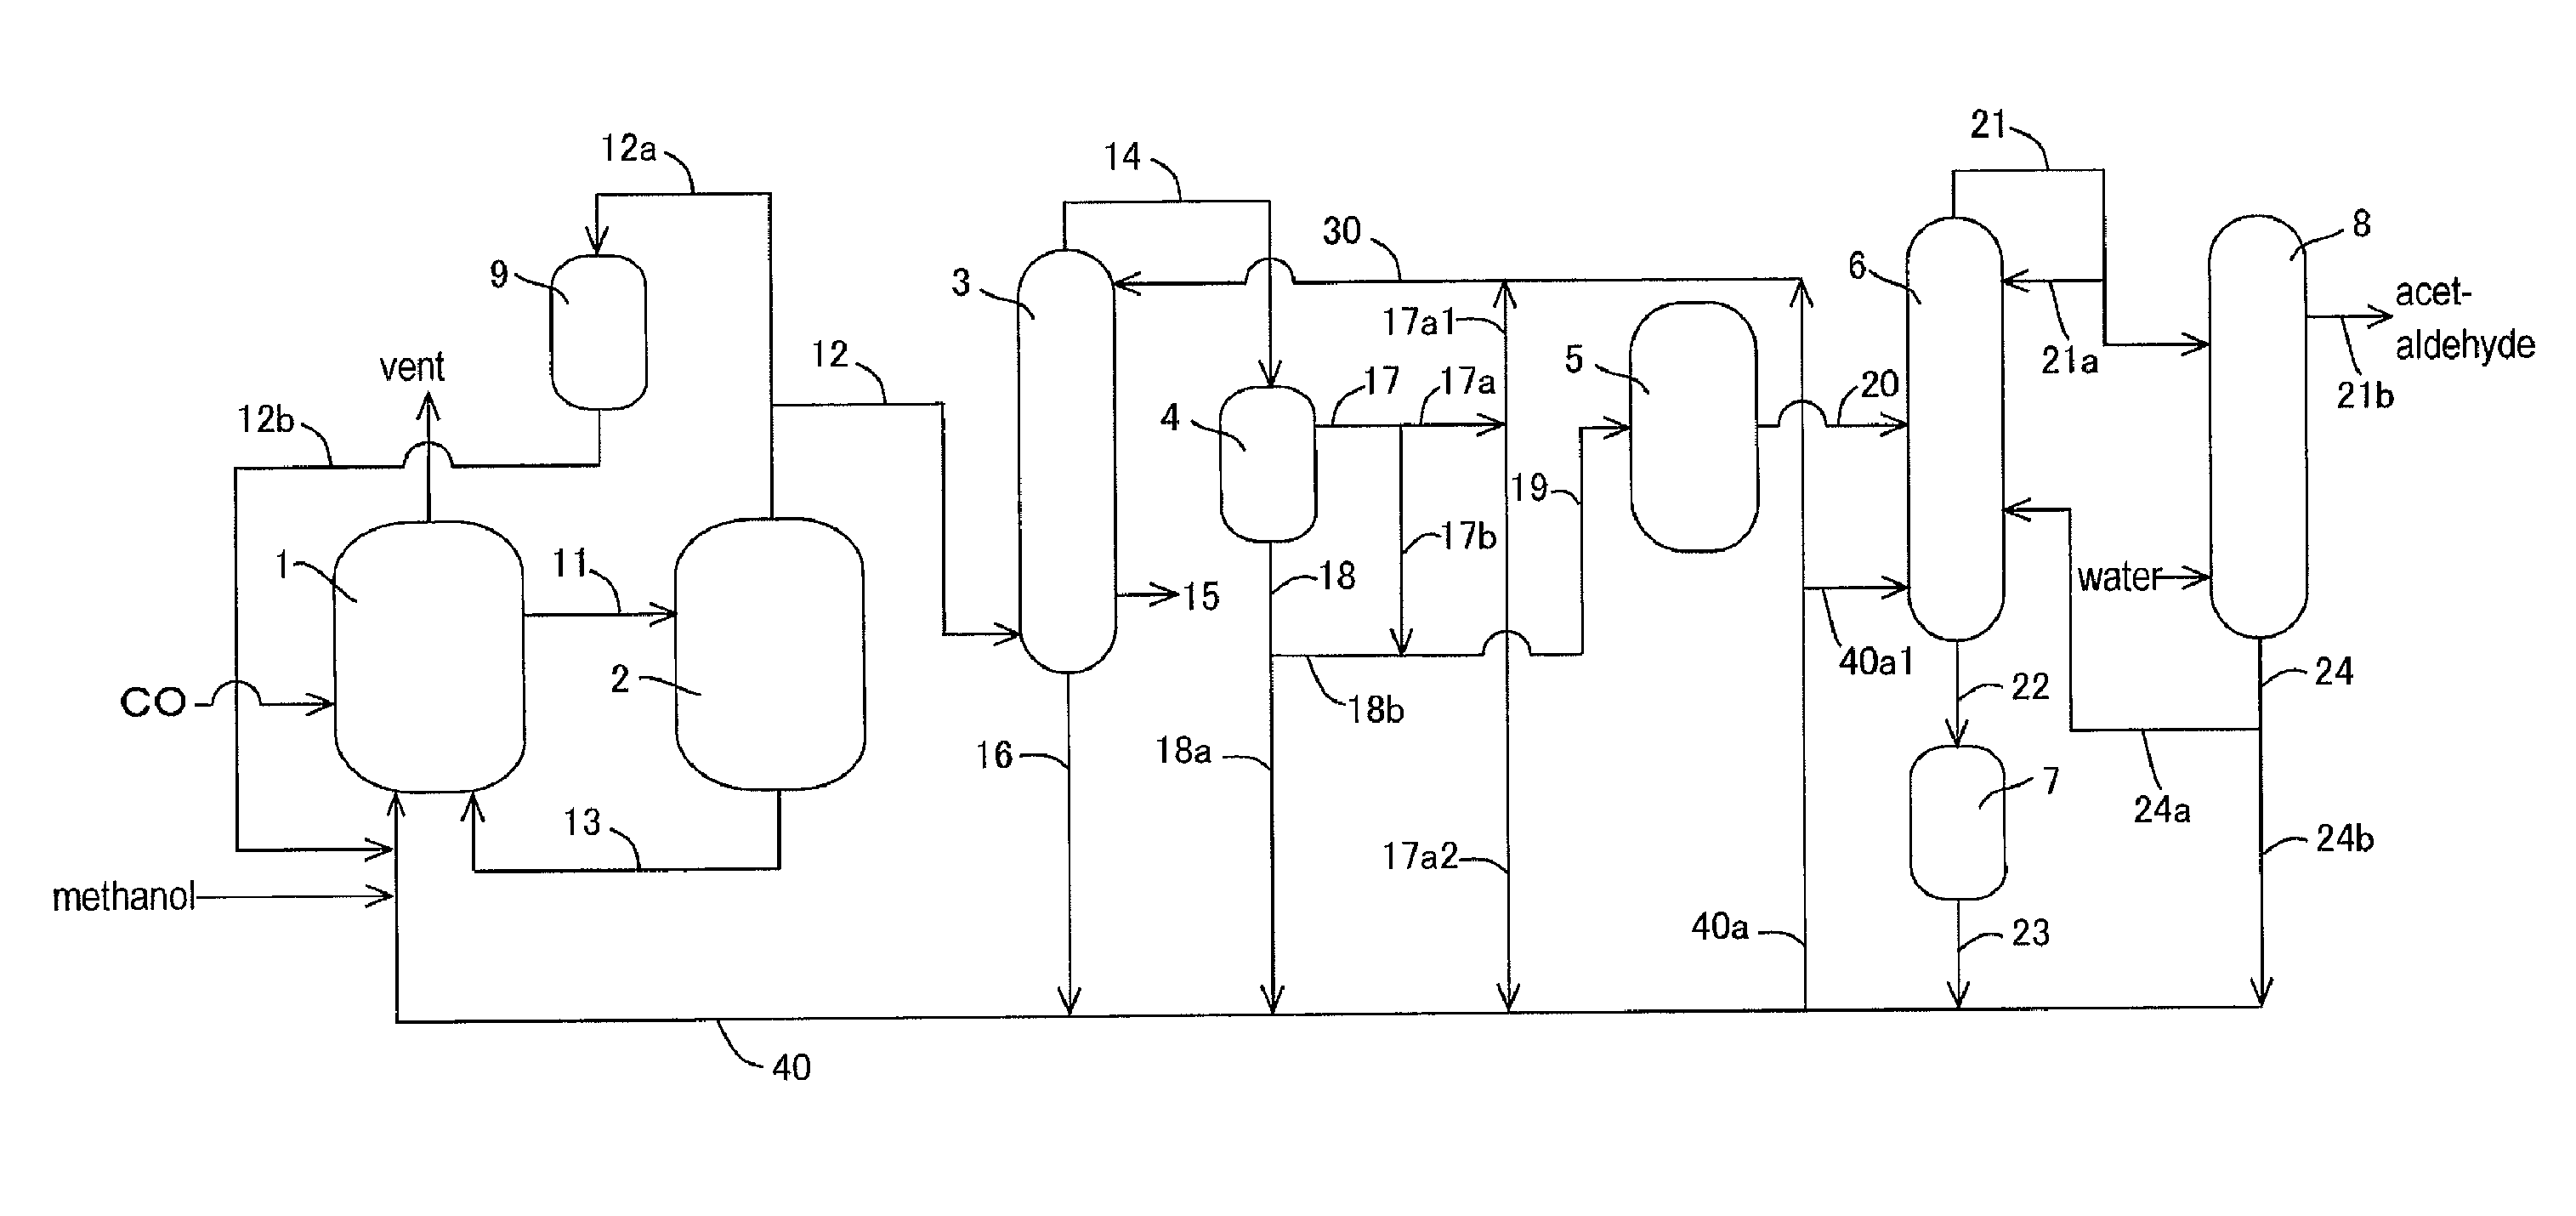 Process for producing acetic acid